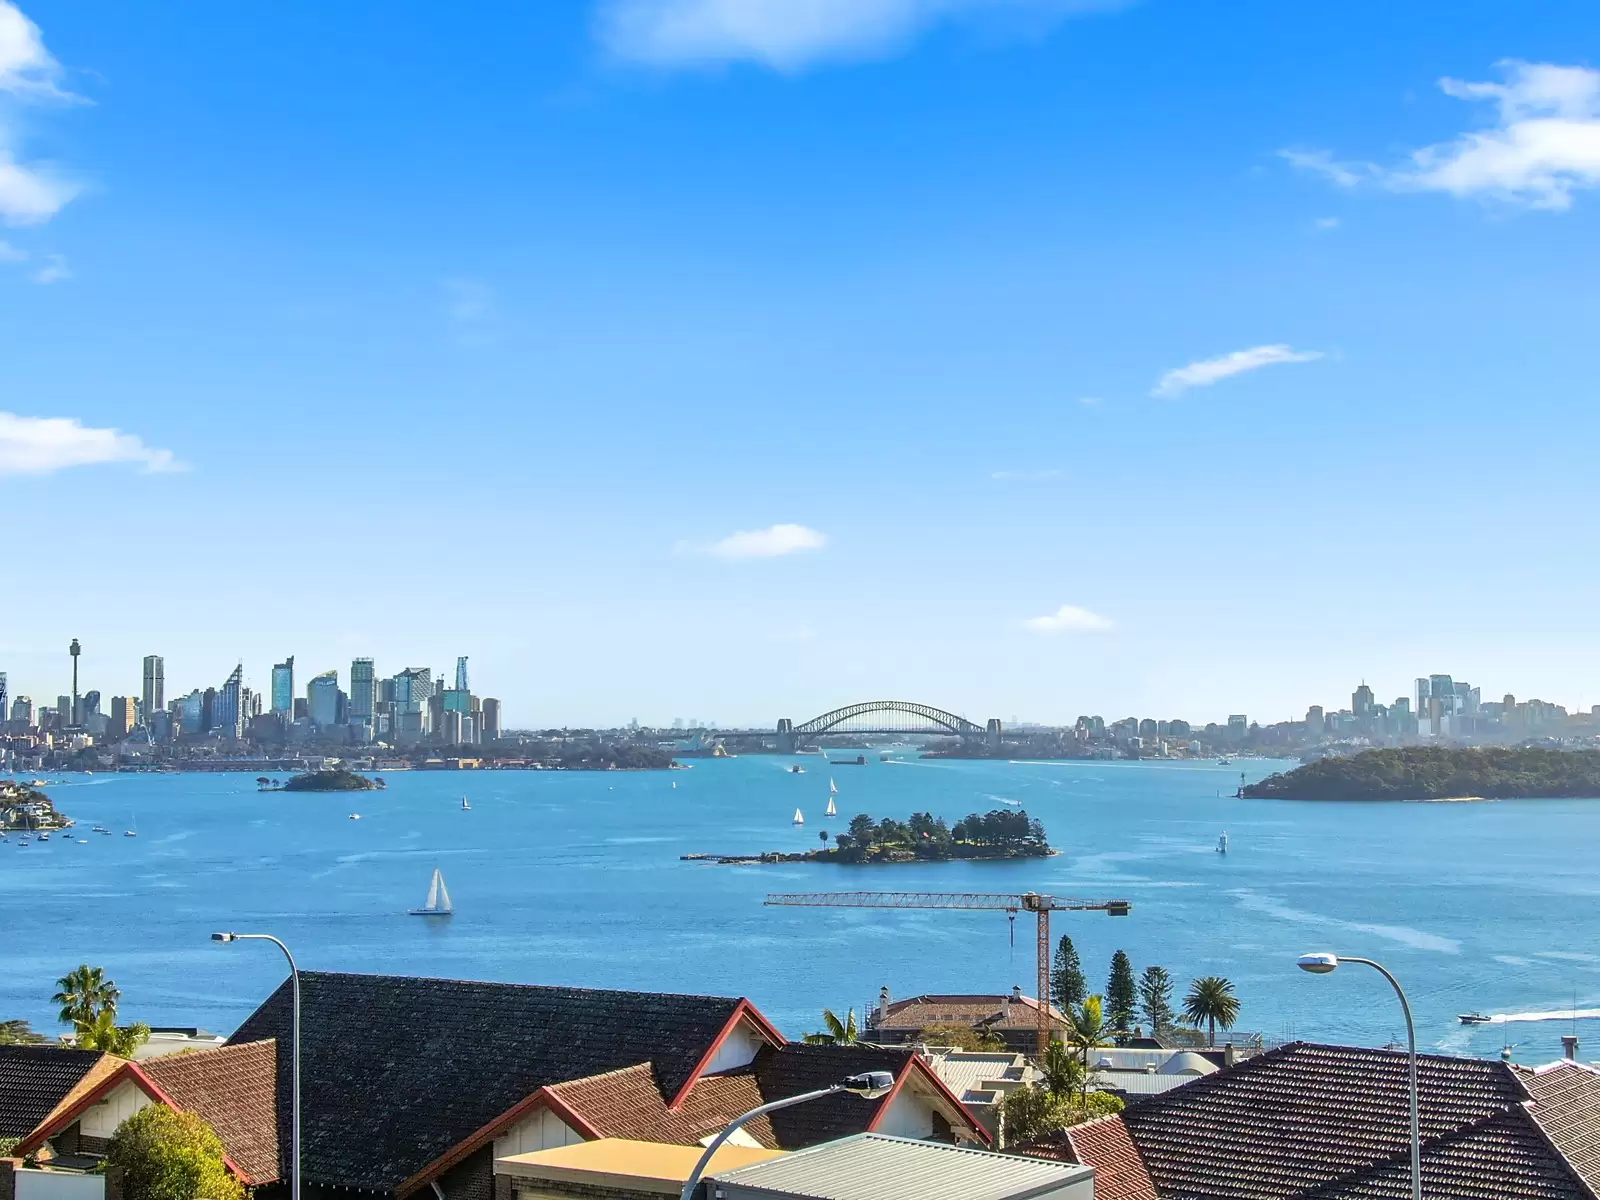 Photo #4: 35 New South Head Road, Vaucluse - Sold by Sydney Sotheby's International Realty